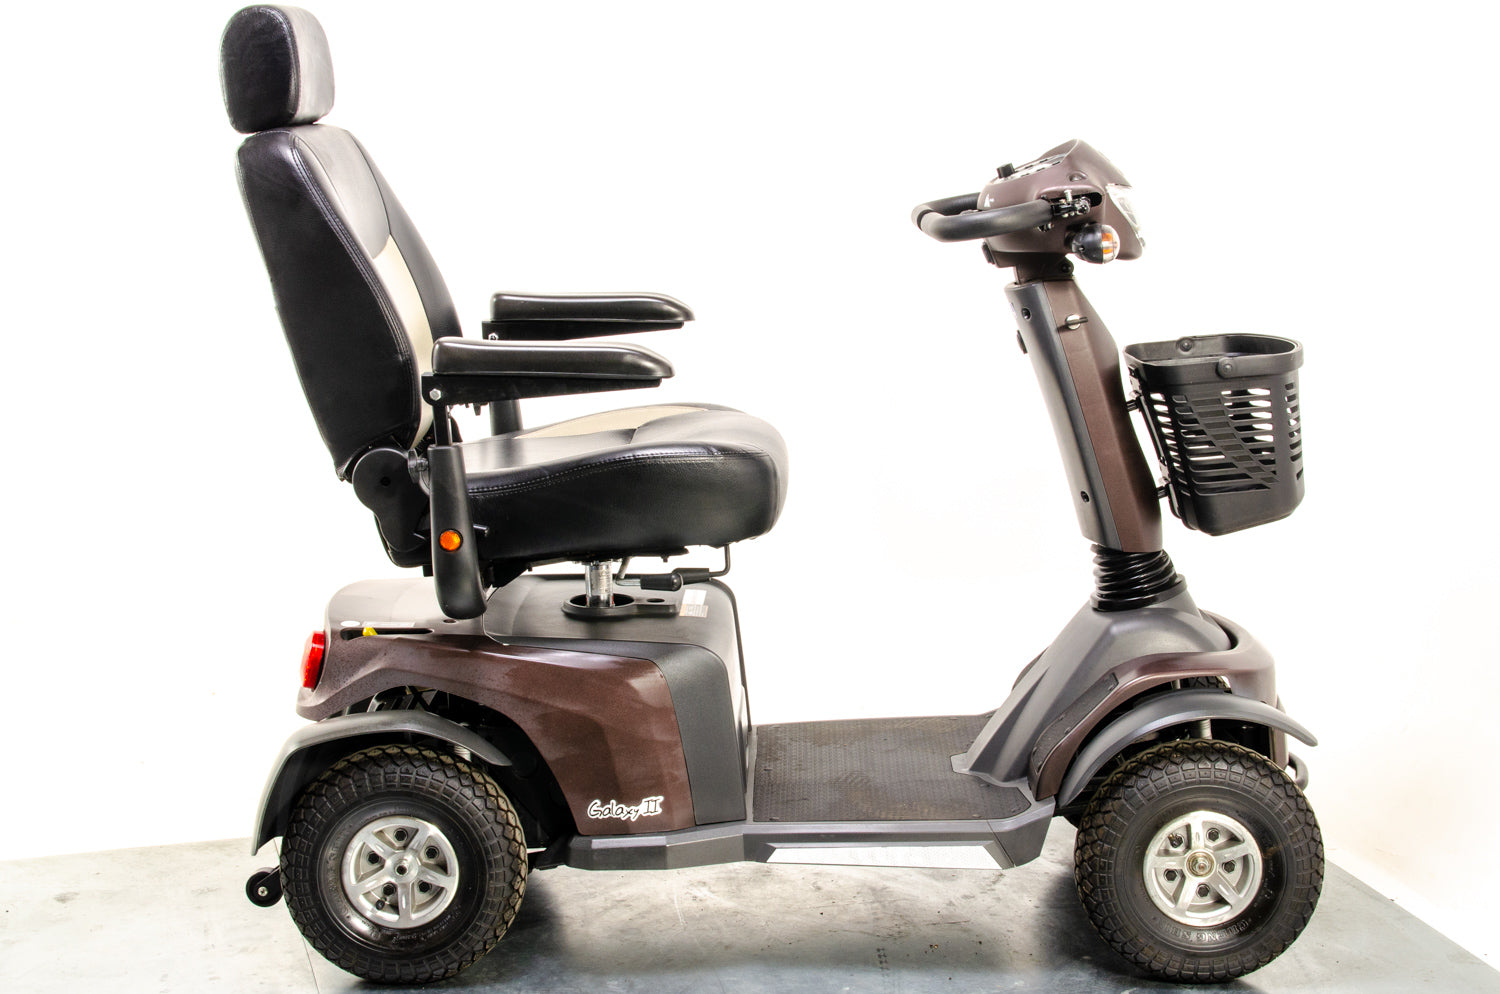 Van Os Galaxy II Used Mobility Scooter 8mph Large Comfort Class 3 Road Legal 13352